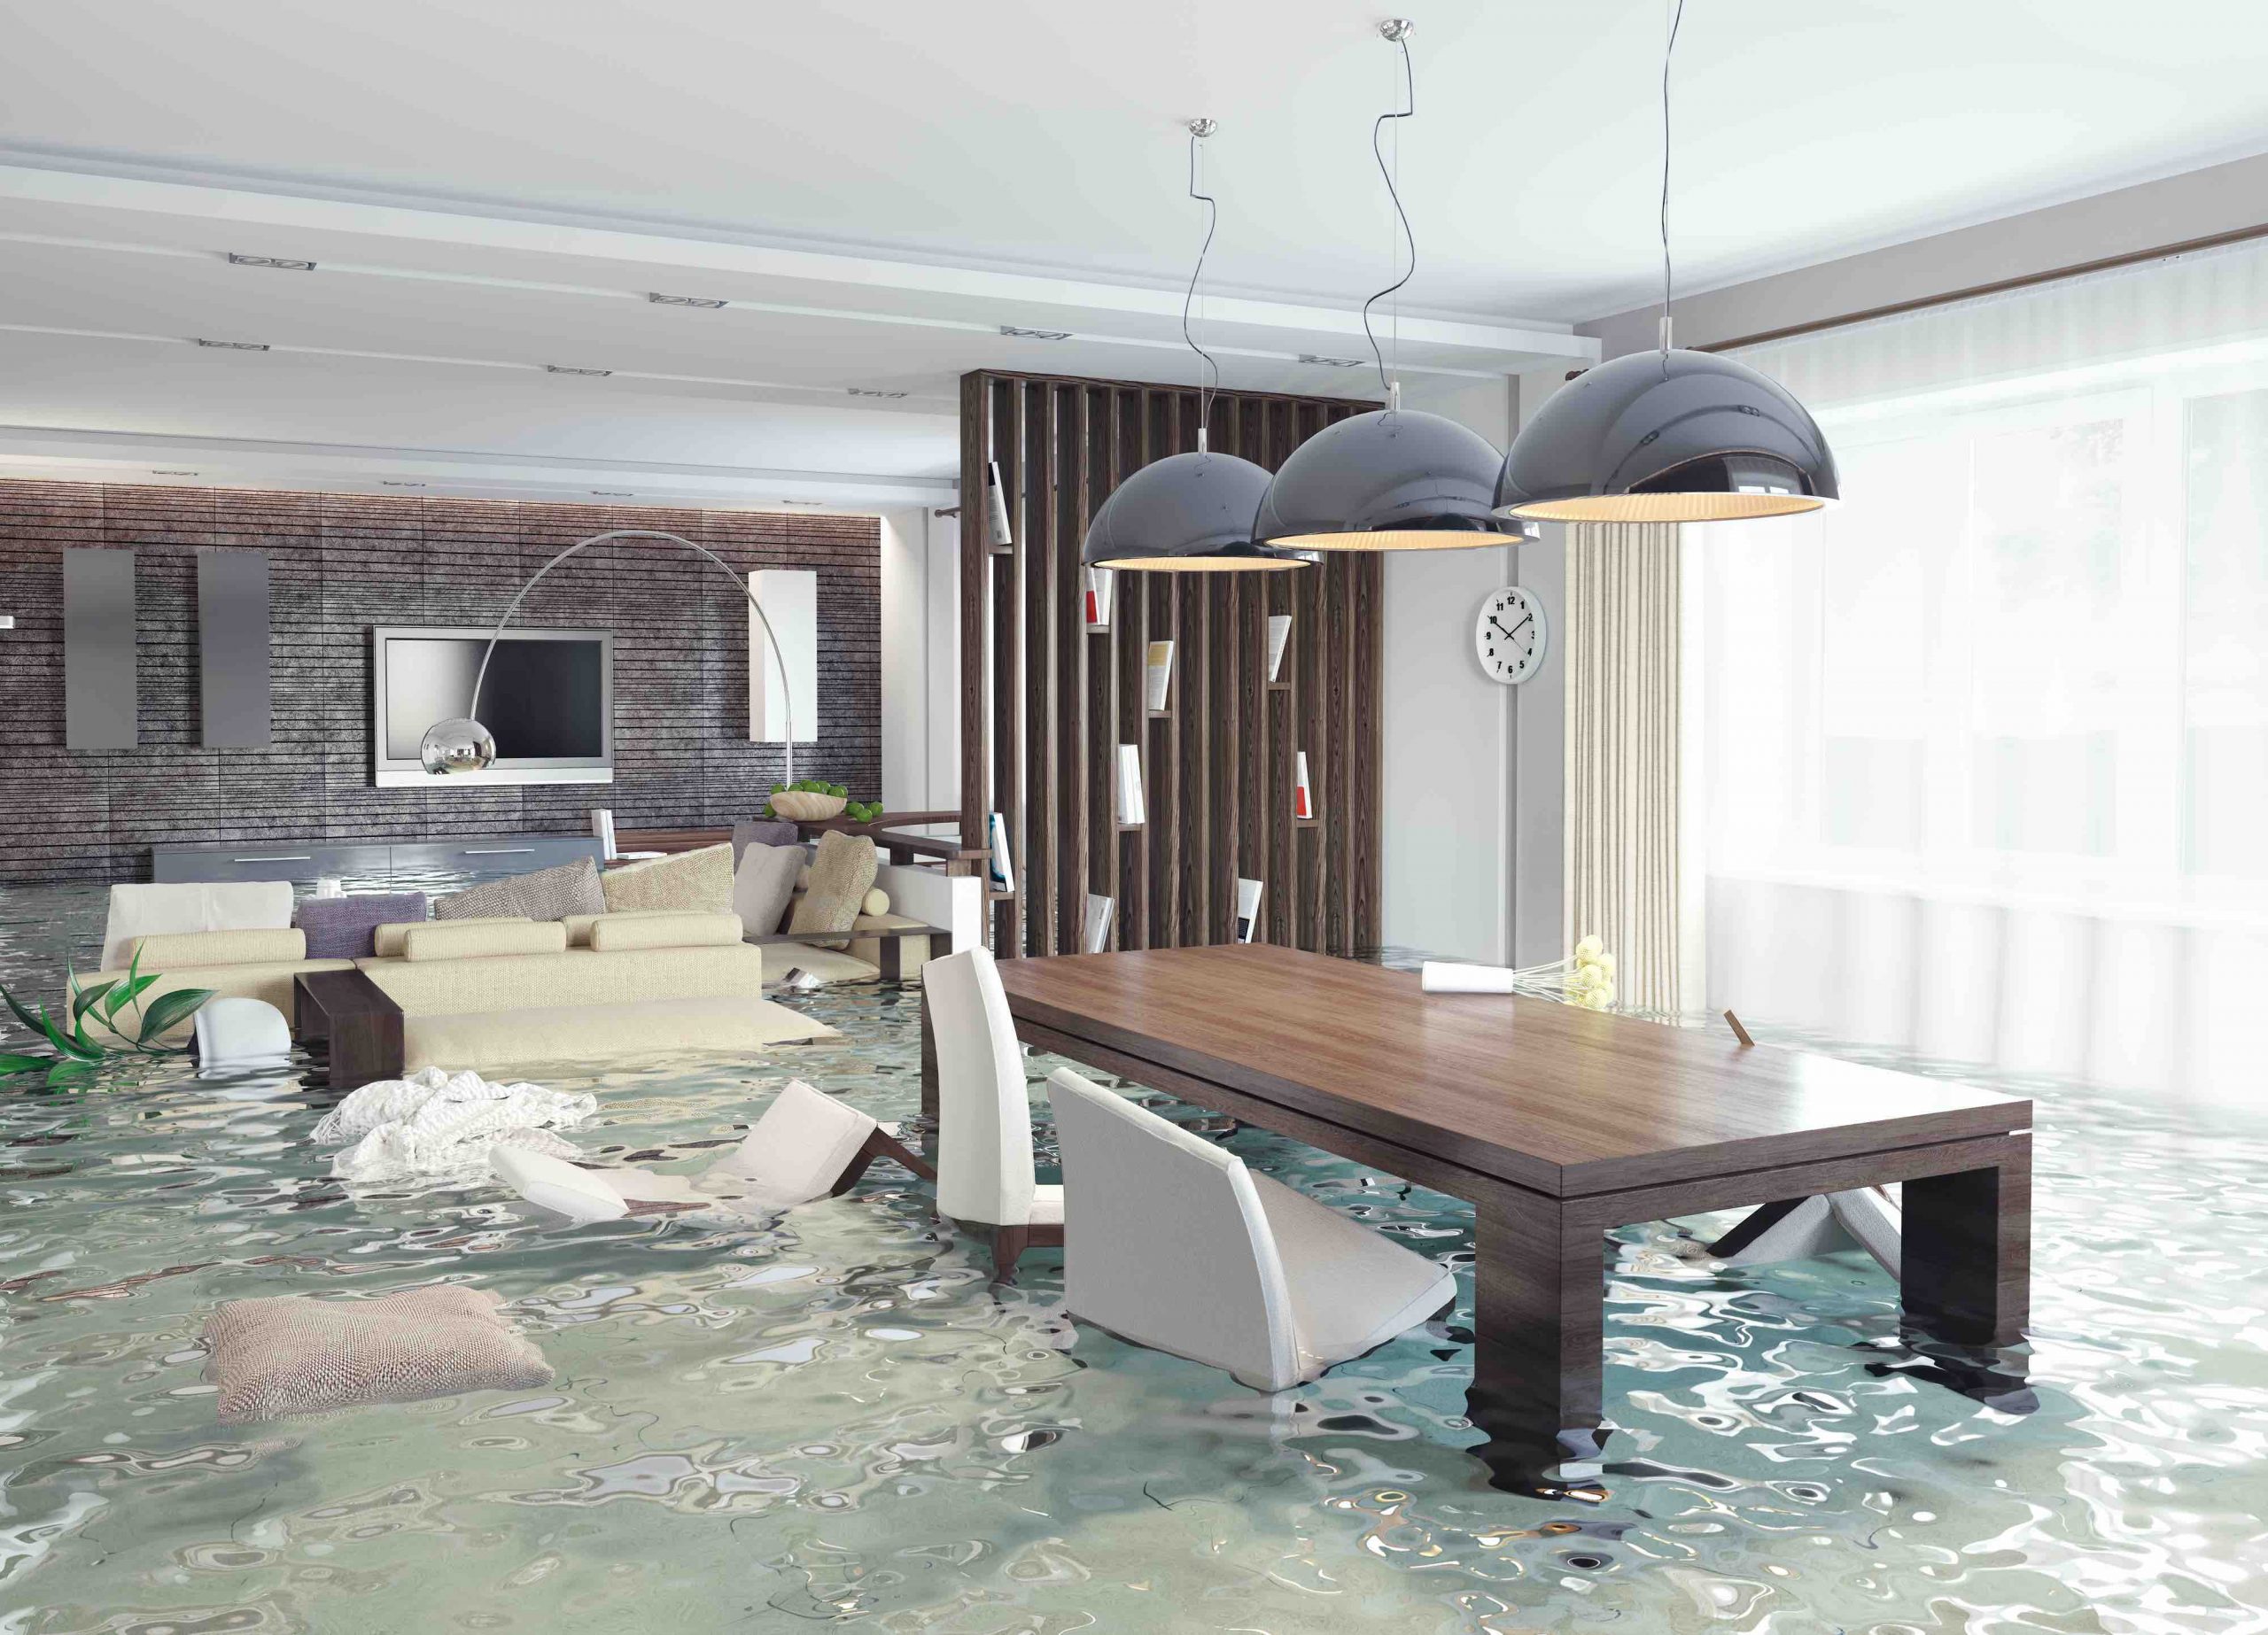 A flood damaged property with deep water in a home's dining room.